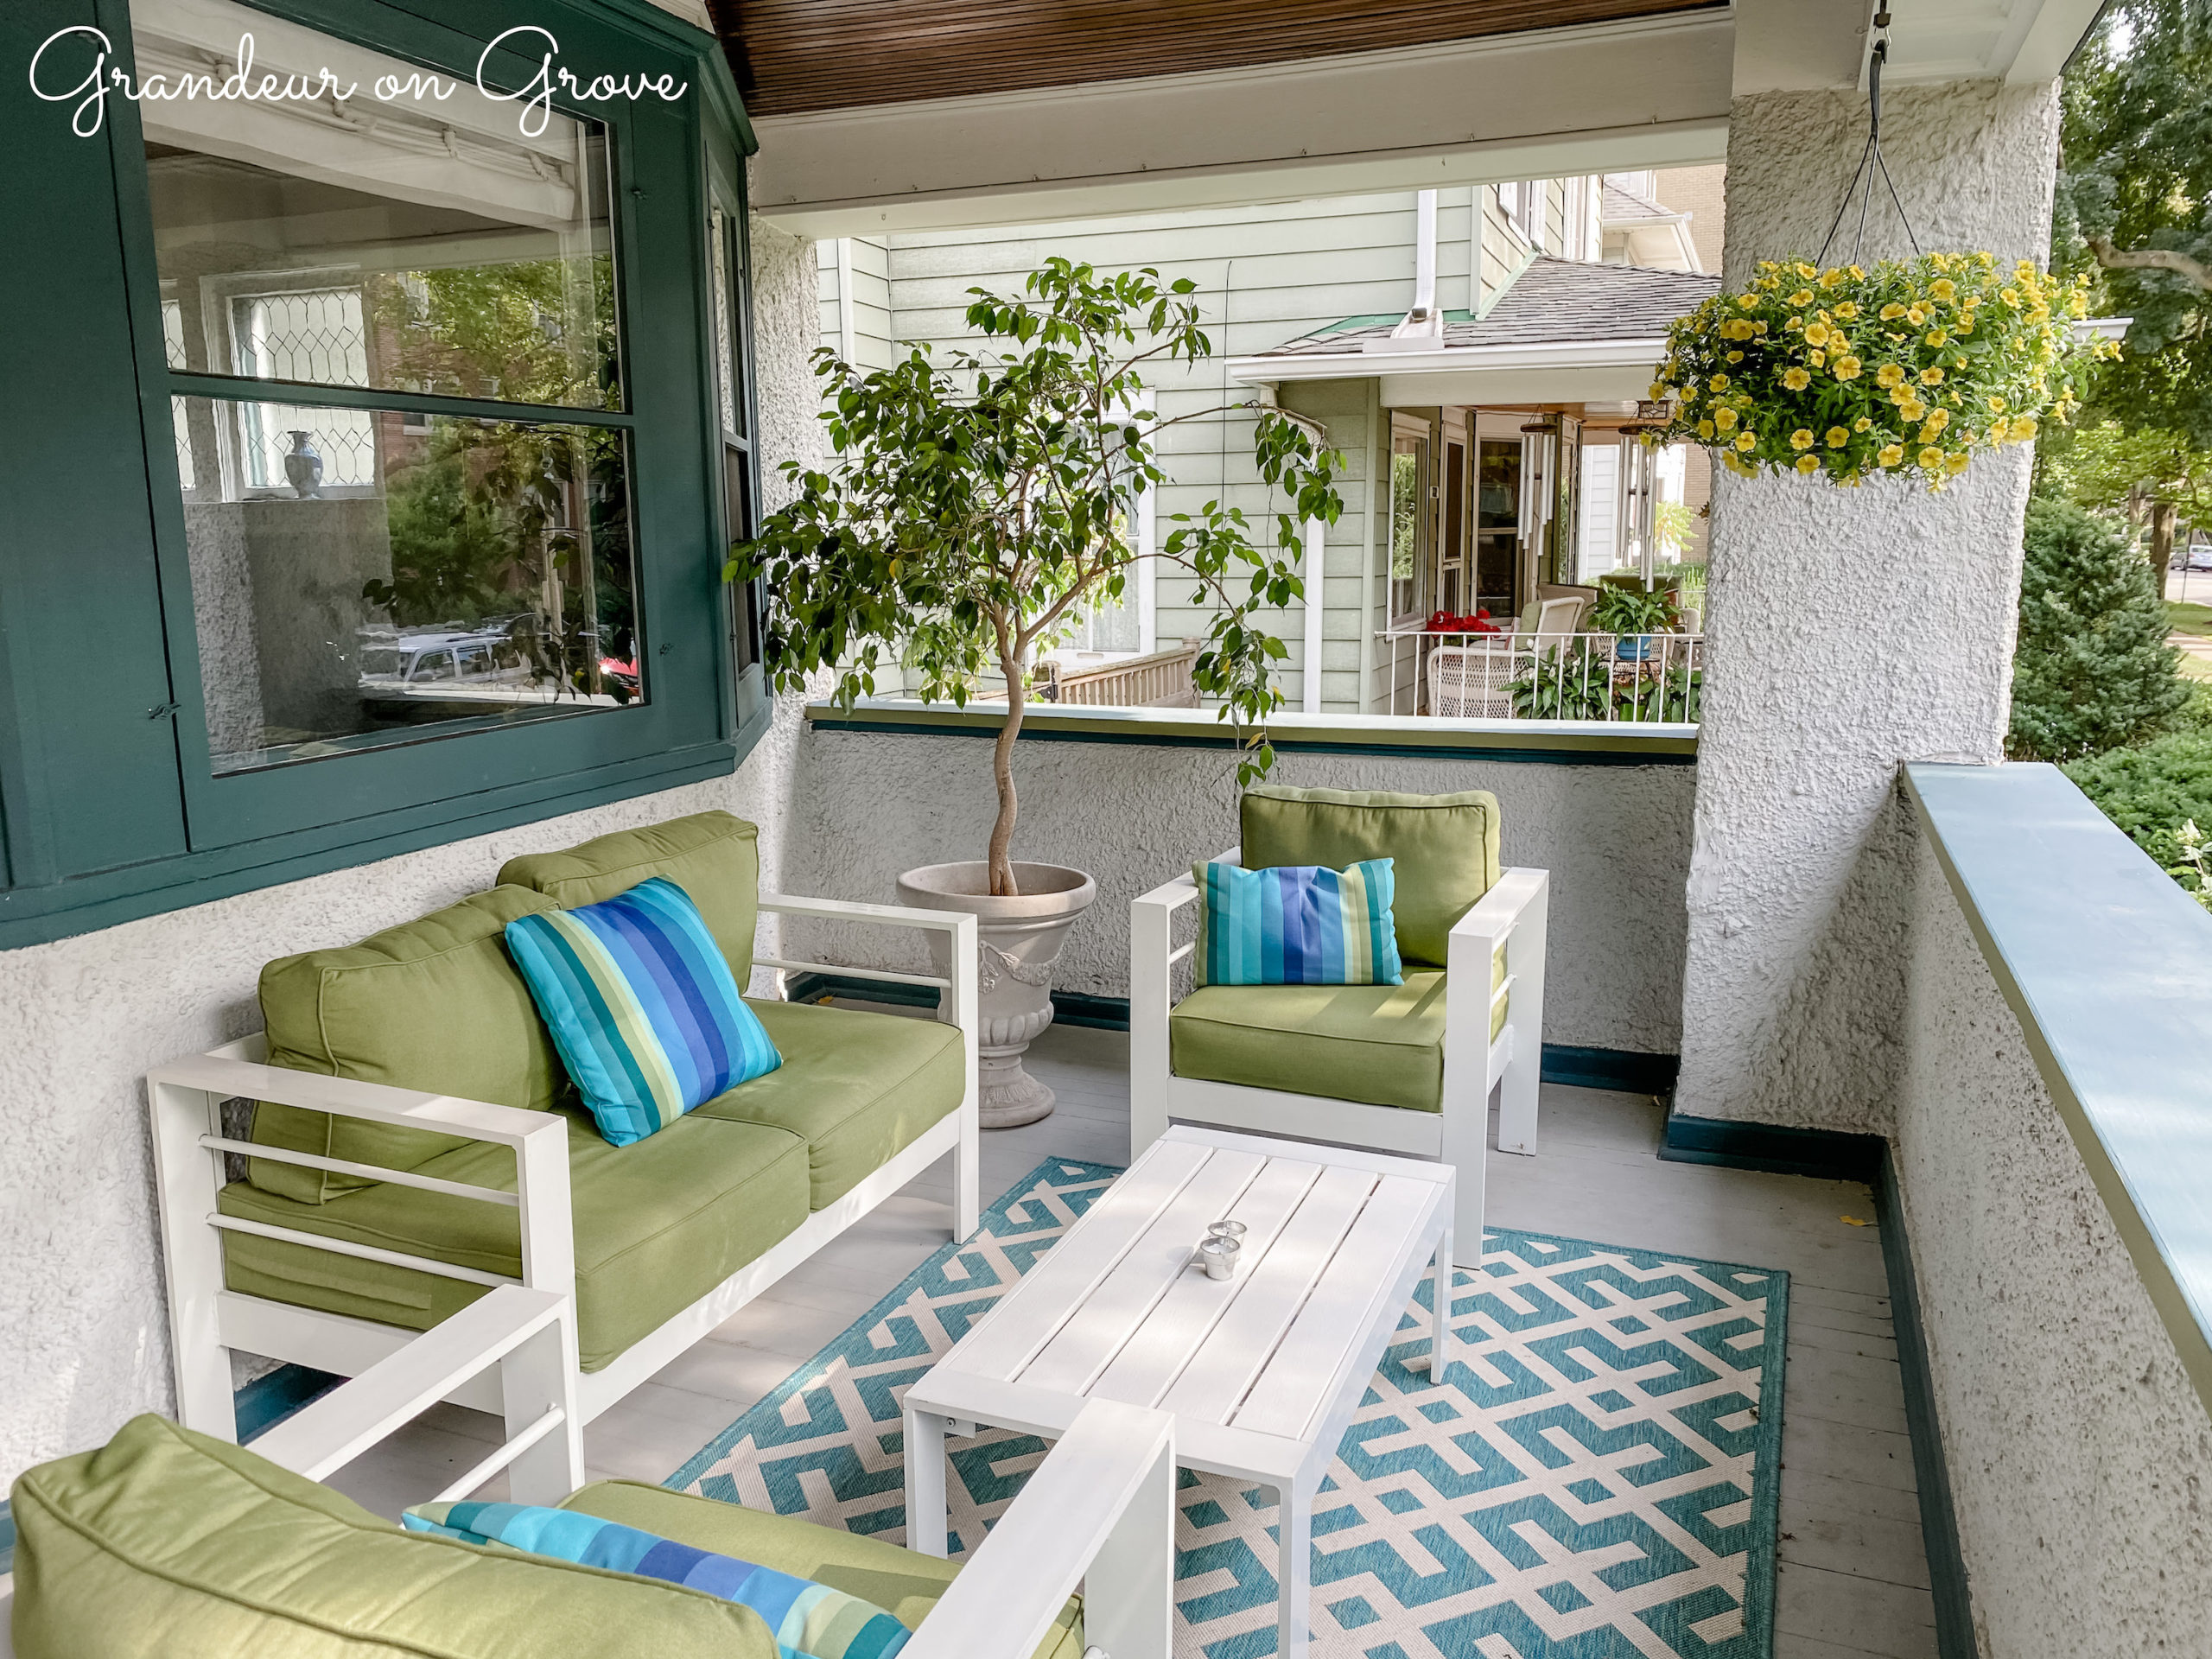 A front porch patio set with decorative flowers and trees